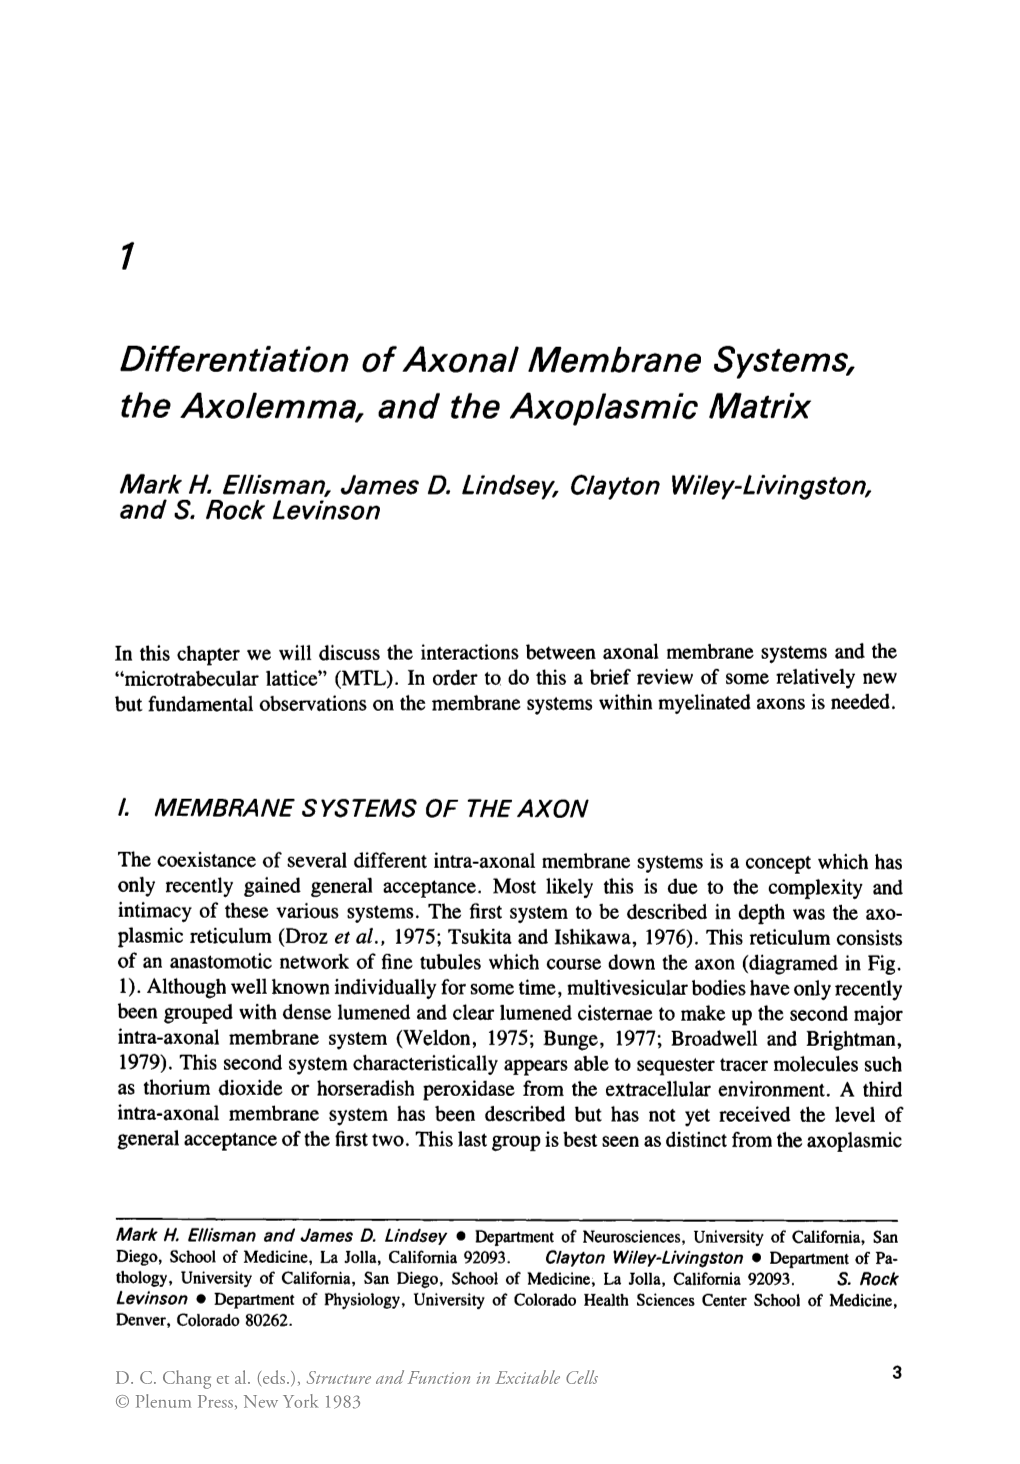 Differentiation of Axonal Membrane Systems, the Axolemma, and the Axoplasmic Matrix